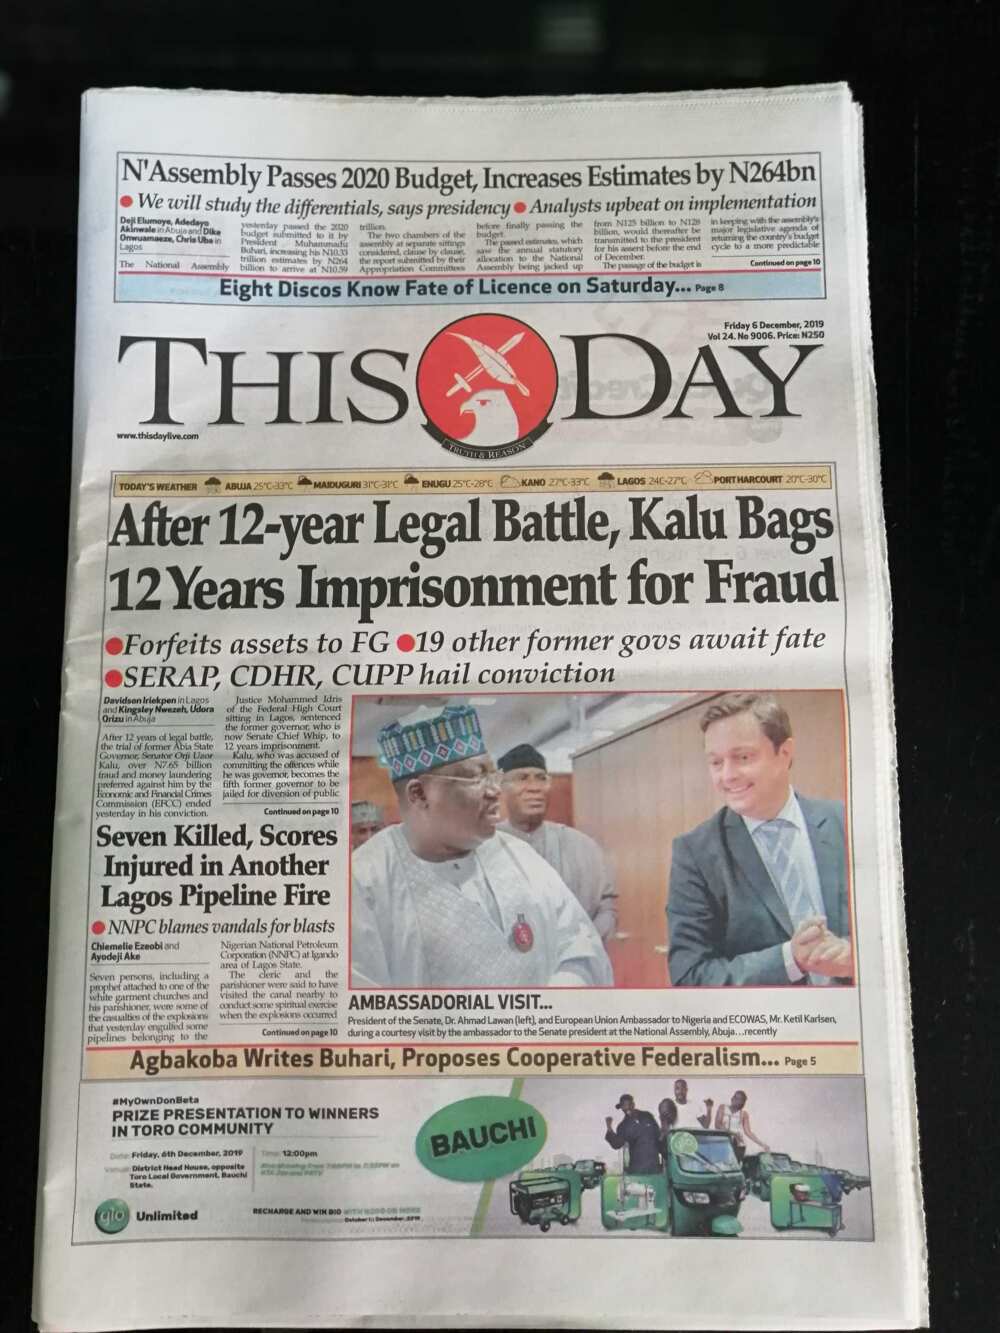 Newspaper review for Friday, December 6: Reactions as court jails Orji Kalu 12 years